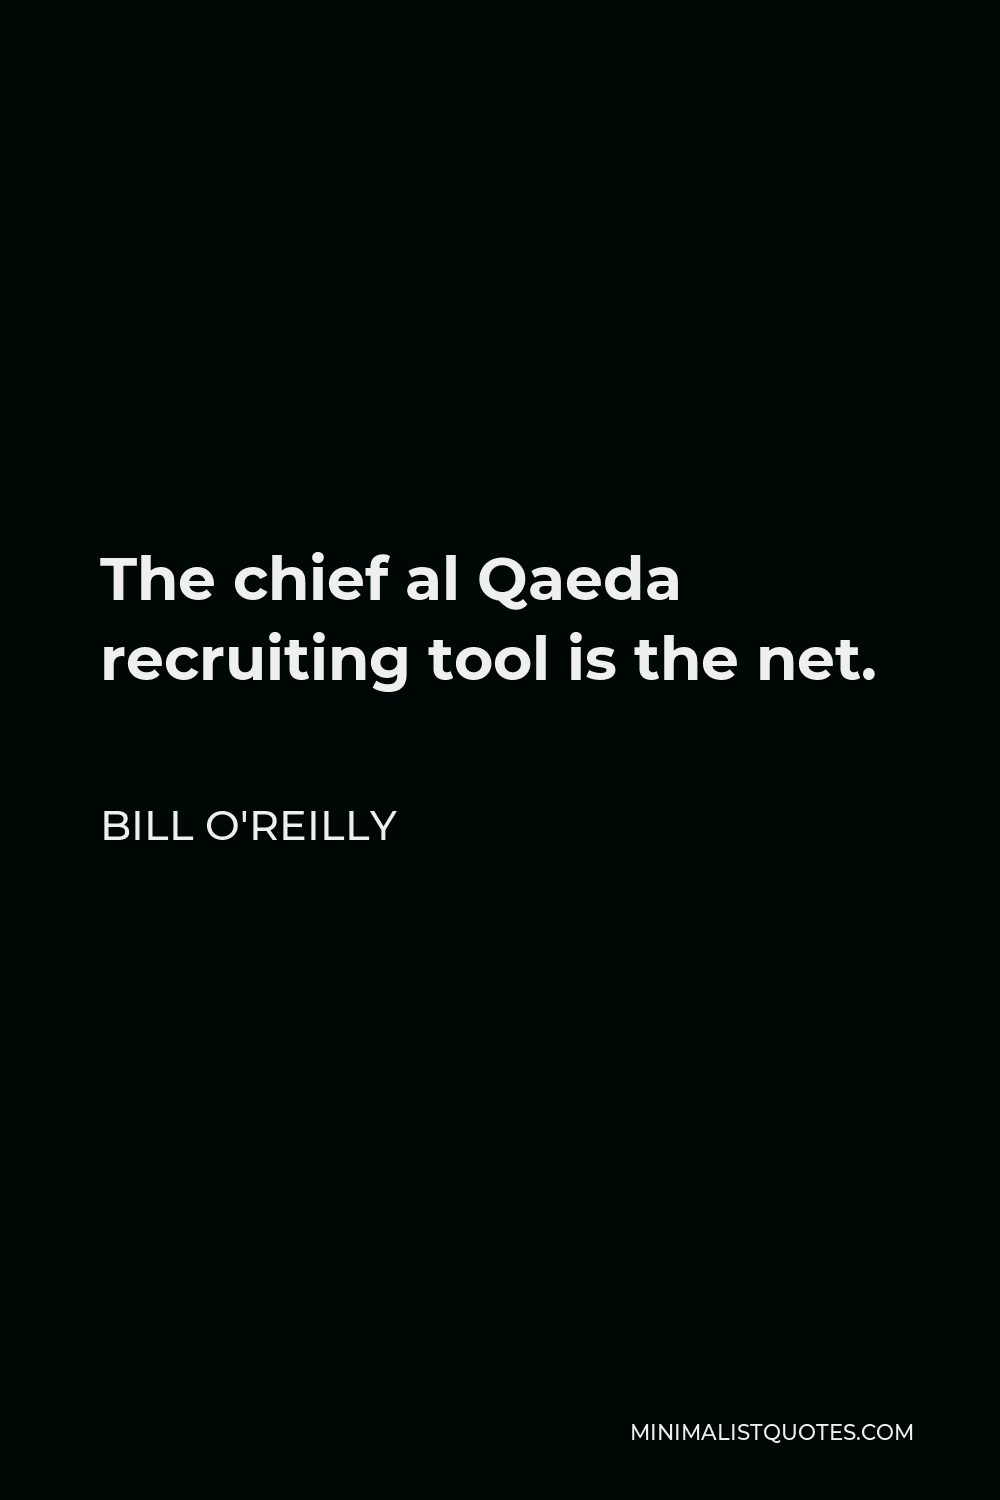 Bill O'Reilly Quote - The chief al Qaeda recruiting tool is the net.